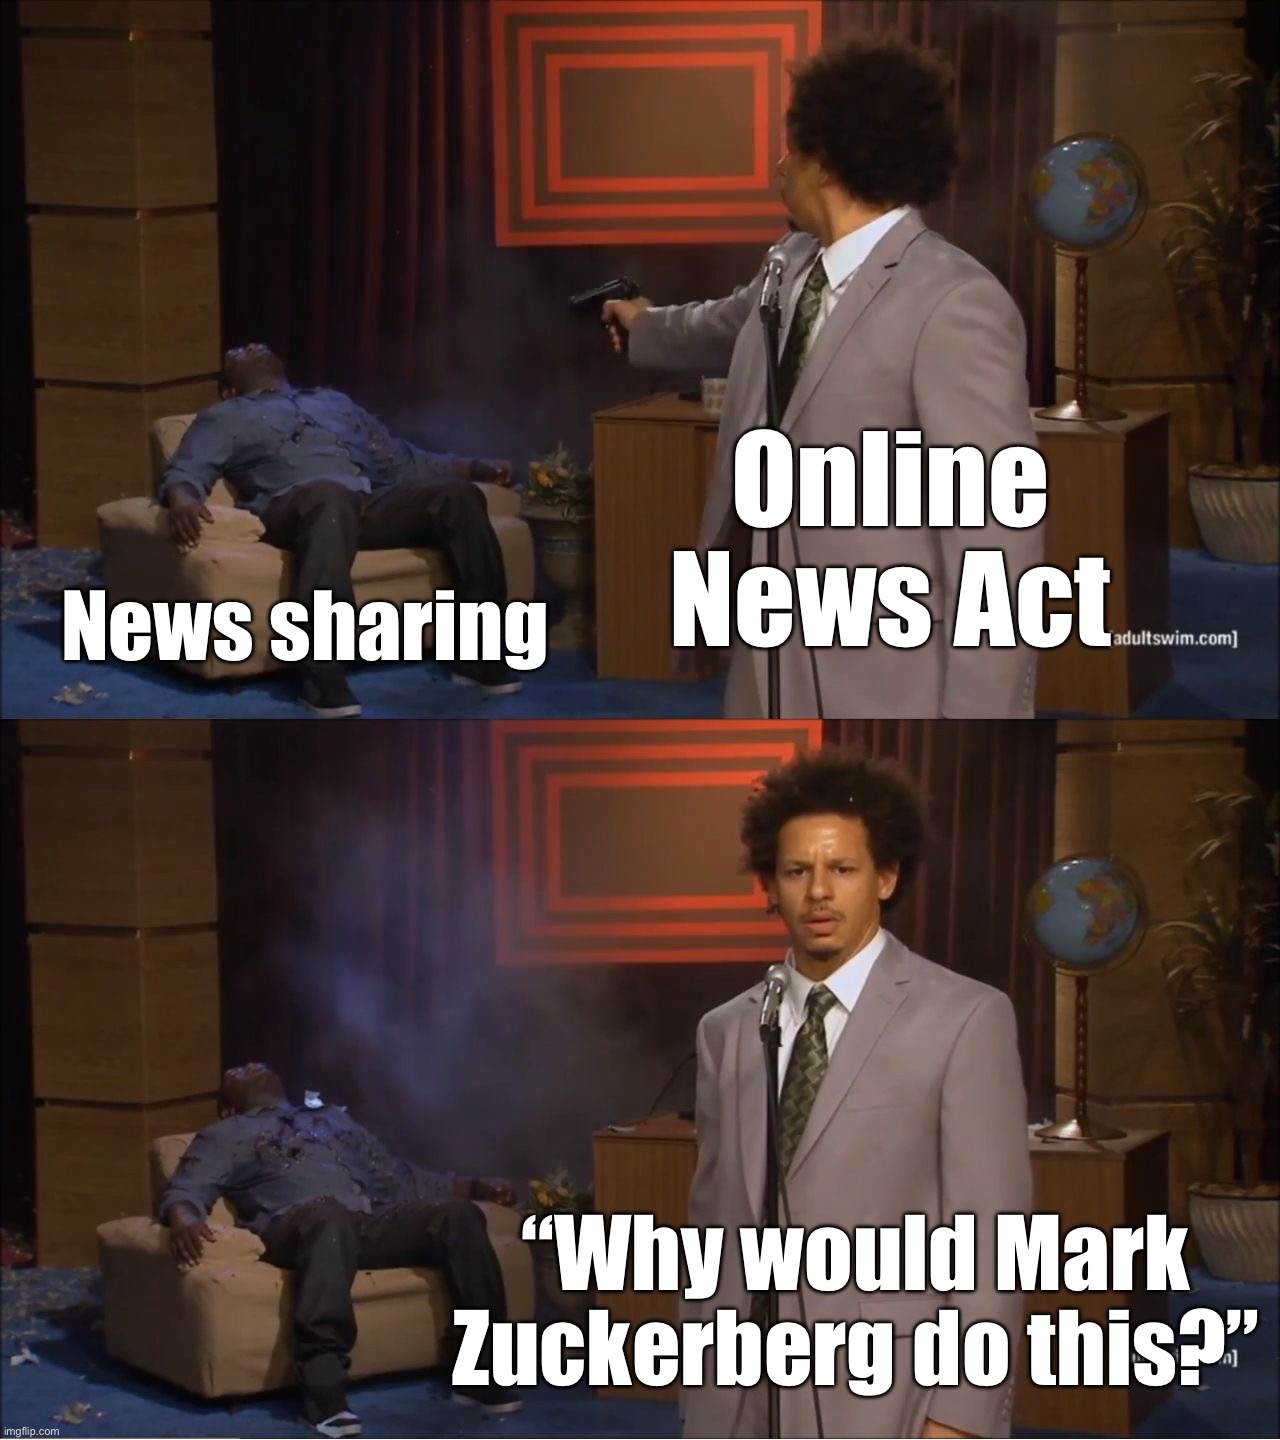 Who Killed Hannibal | Online News Act; News sharing; “Why would Mark Zuckerberg do this?” | image tagged in memes,who killed hannibal,online news act,wildfires | made w/ Imgflip meme maker